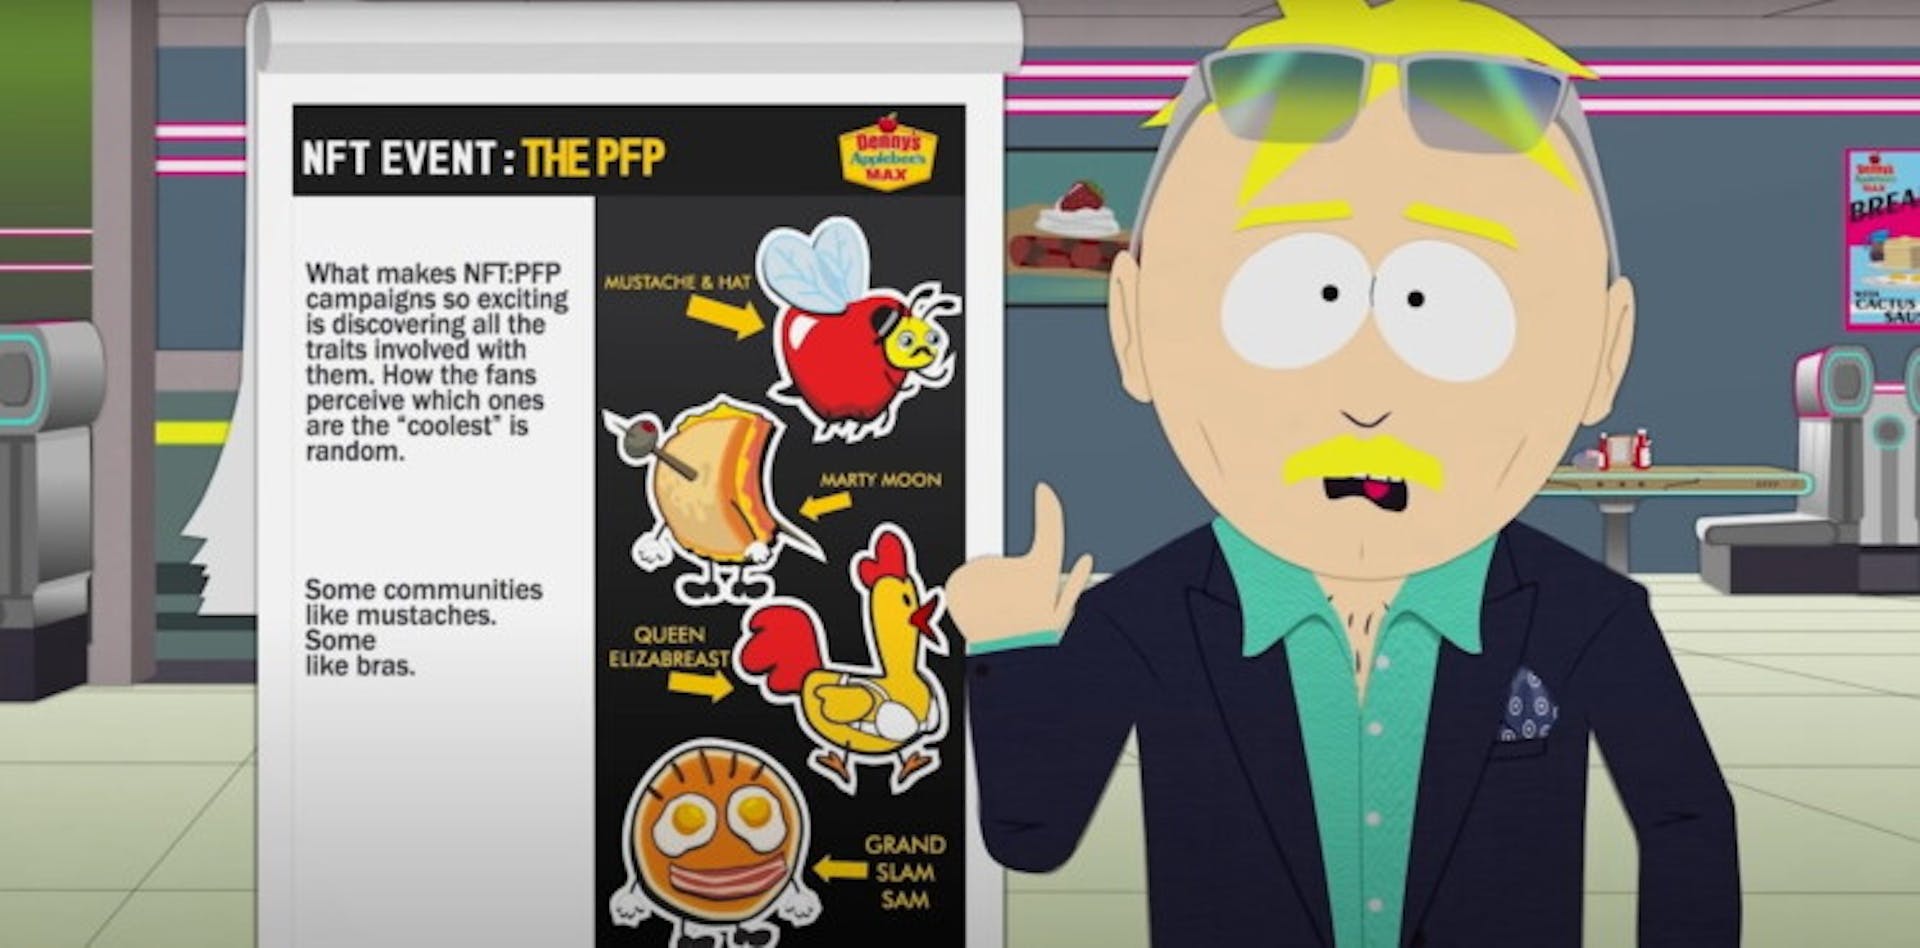 Leopold "Butters" Stotch persuades a fast food chain to release the NFT. A still from a special episode of "South Park"